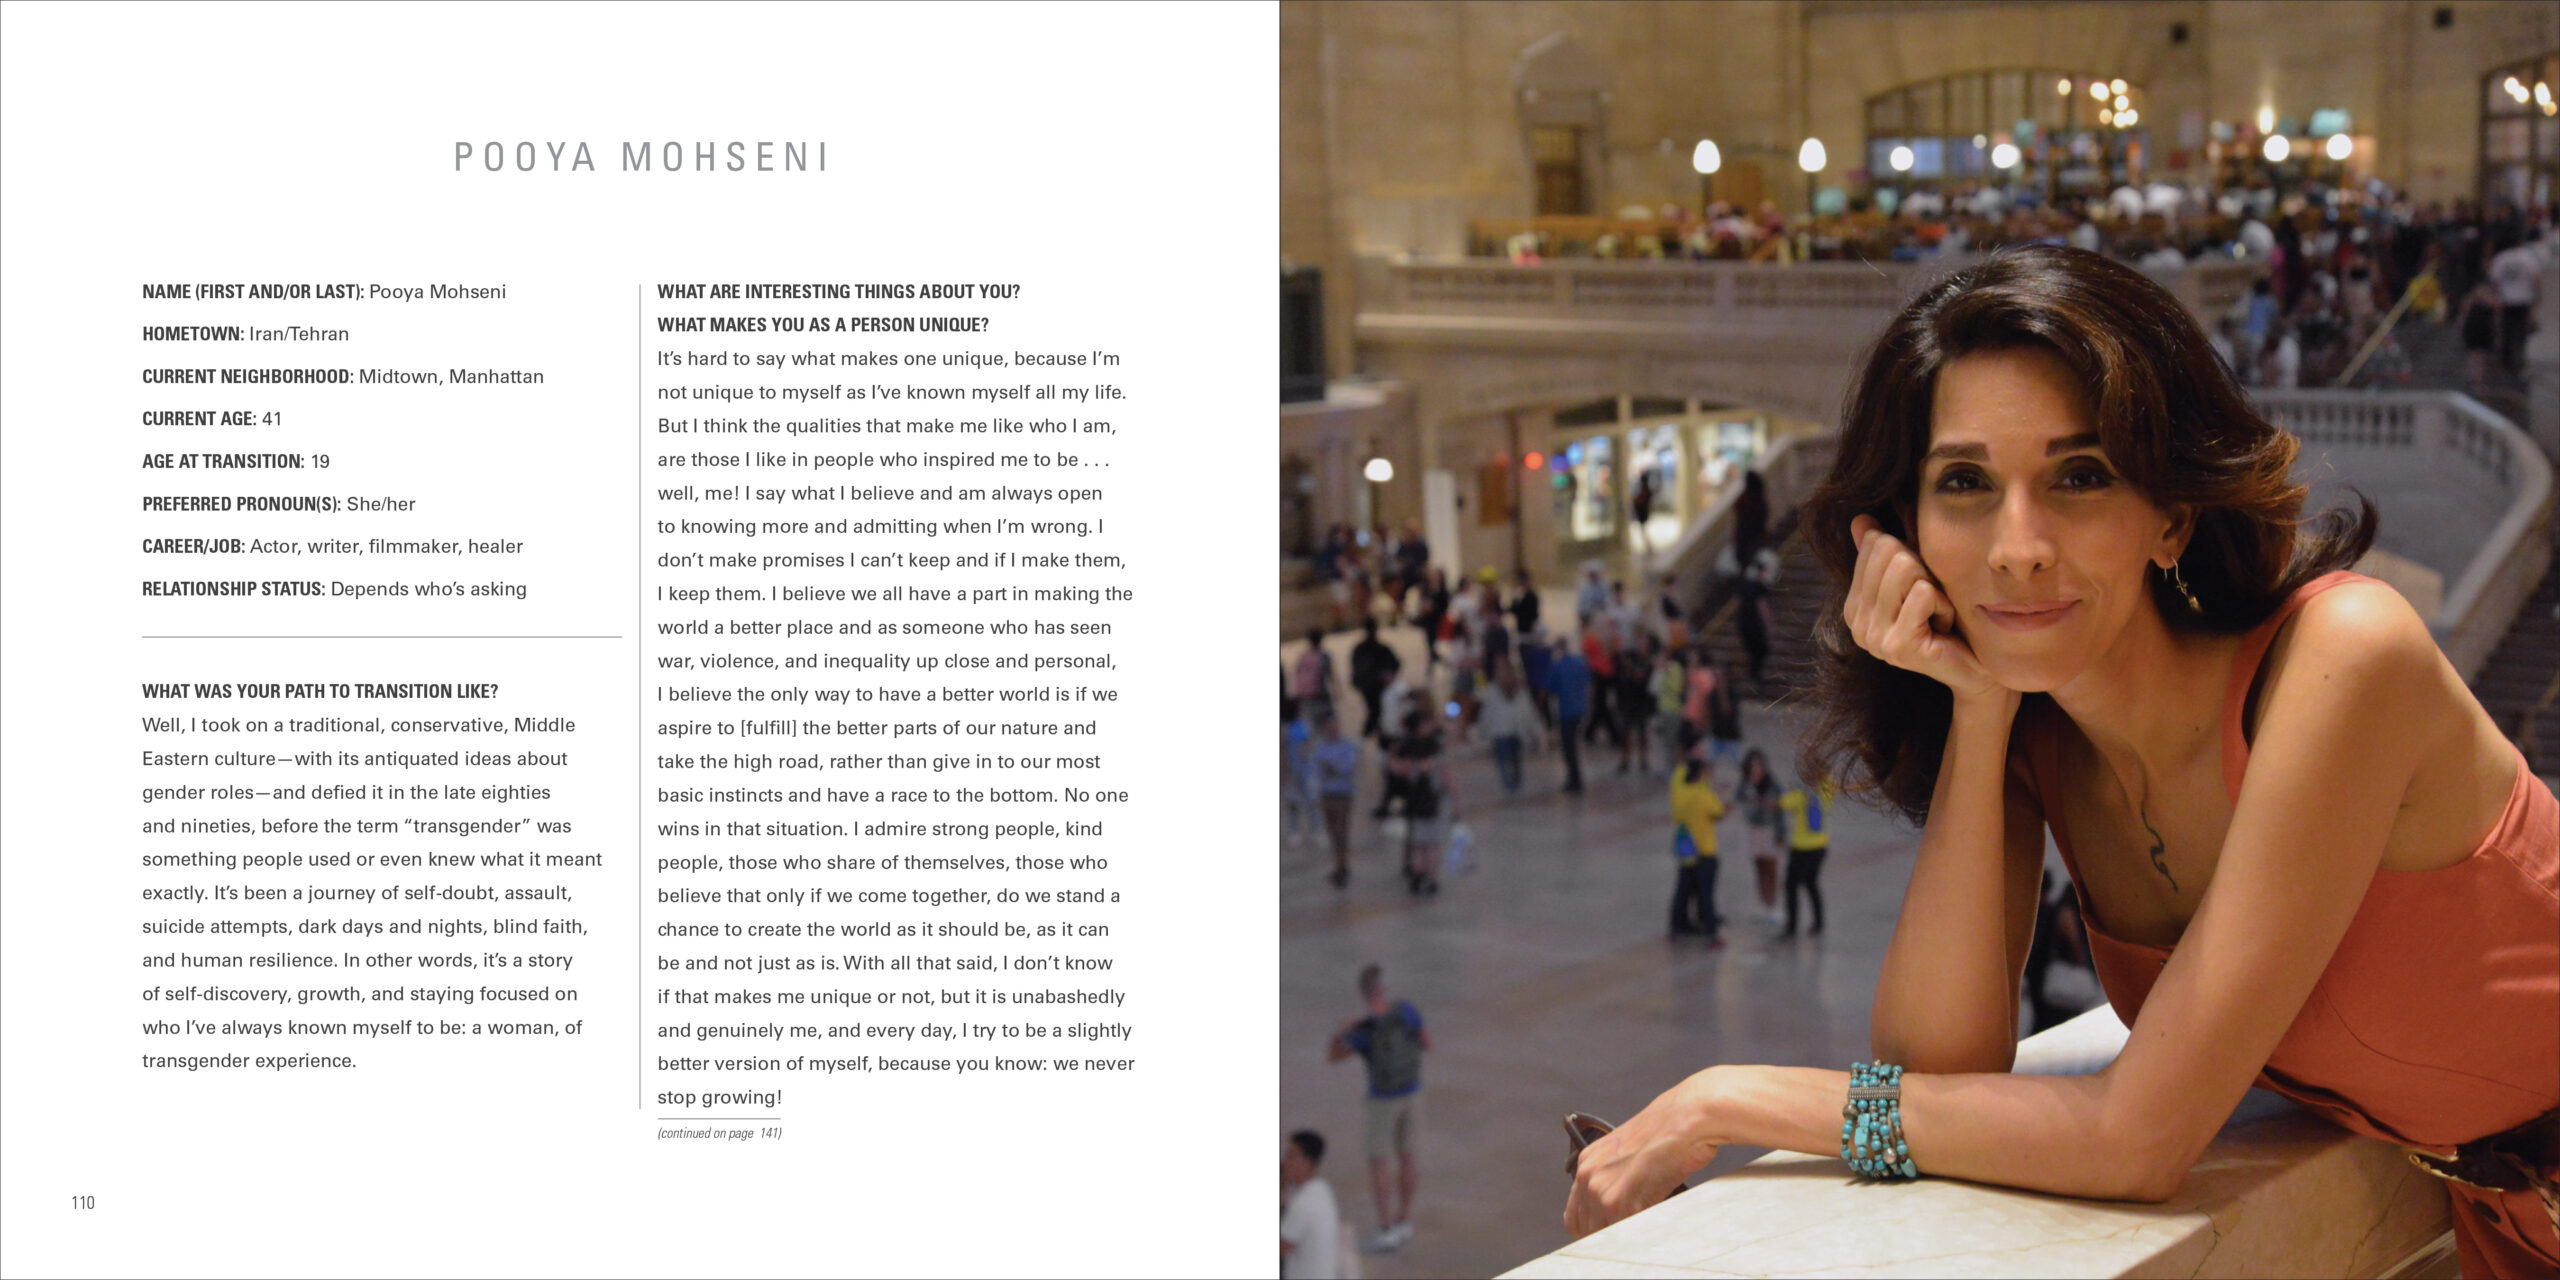 A photograph and interview with Pooya Mohseni featured in Trans New York by Peter Bussian (Photo Credit: Apollo Publishers)